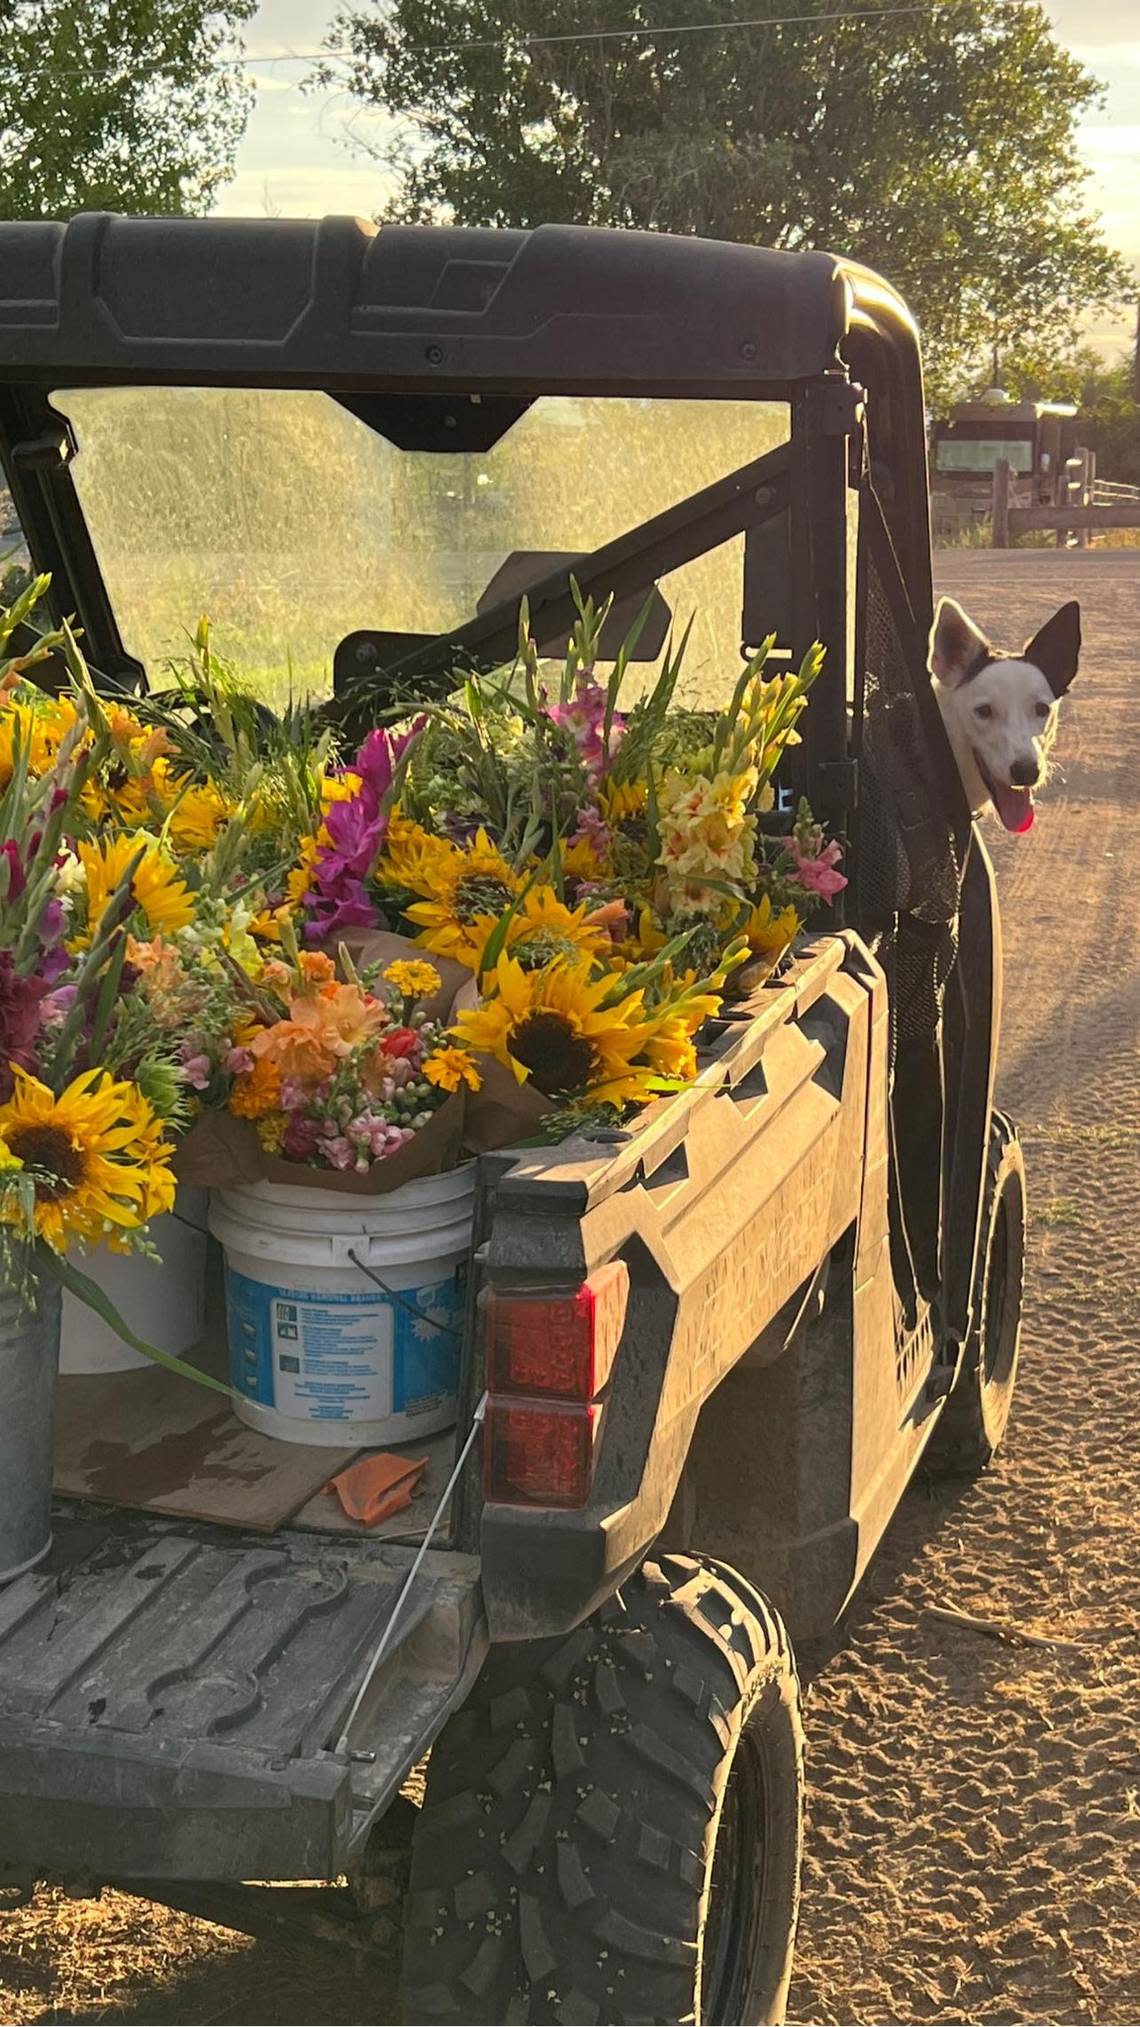 Mark and Cindy McClaskey have been selling gladiolas at the Capital City Public Market since it opened in downtown Boise in 1994. Even their dog, Princess, helps as they prepare bouquets from their own garden for the market.